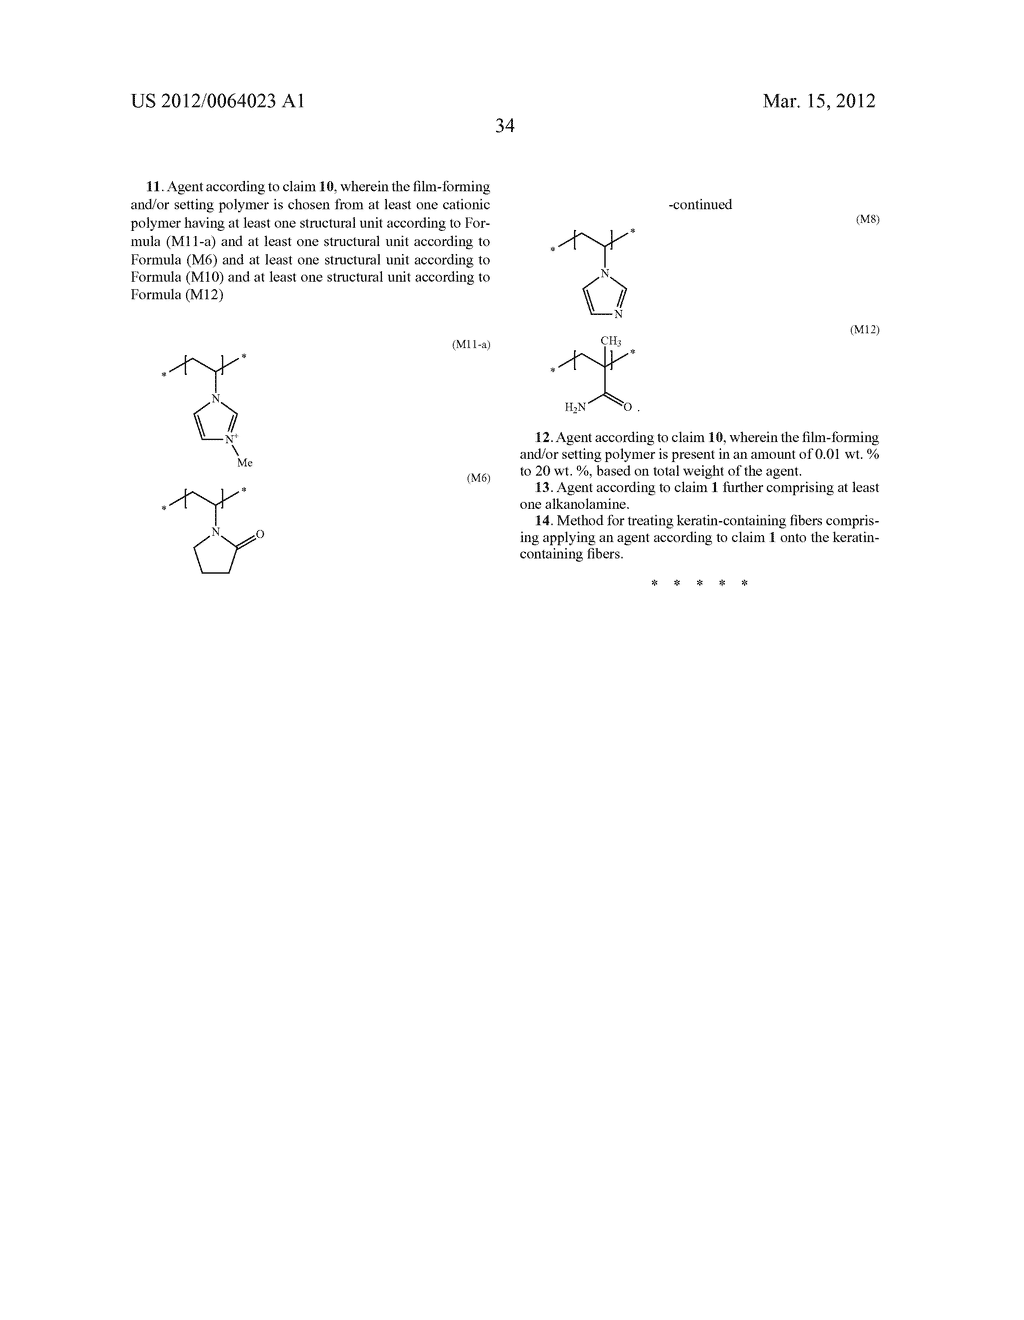 AGENTS FOR FIBERS CONTAINING KERATIN, CONTAINING AT LEAST ONE SPECIAL     CROSS-LINKED AMPHIPHILIC, ANIONIC POLYMER AND AT LEAST ONE FURTHER     SPECIAL NON-CROSS-LINKED AMPHIPHILIC ANIONIC POLYMER - diagram, schematic, and image 35